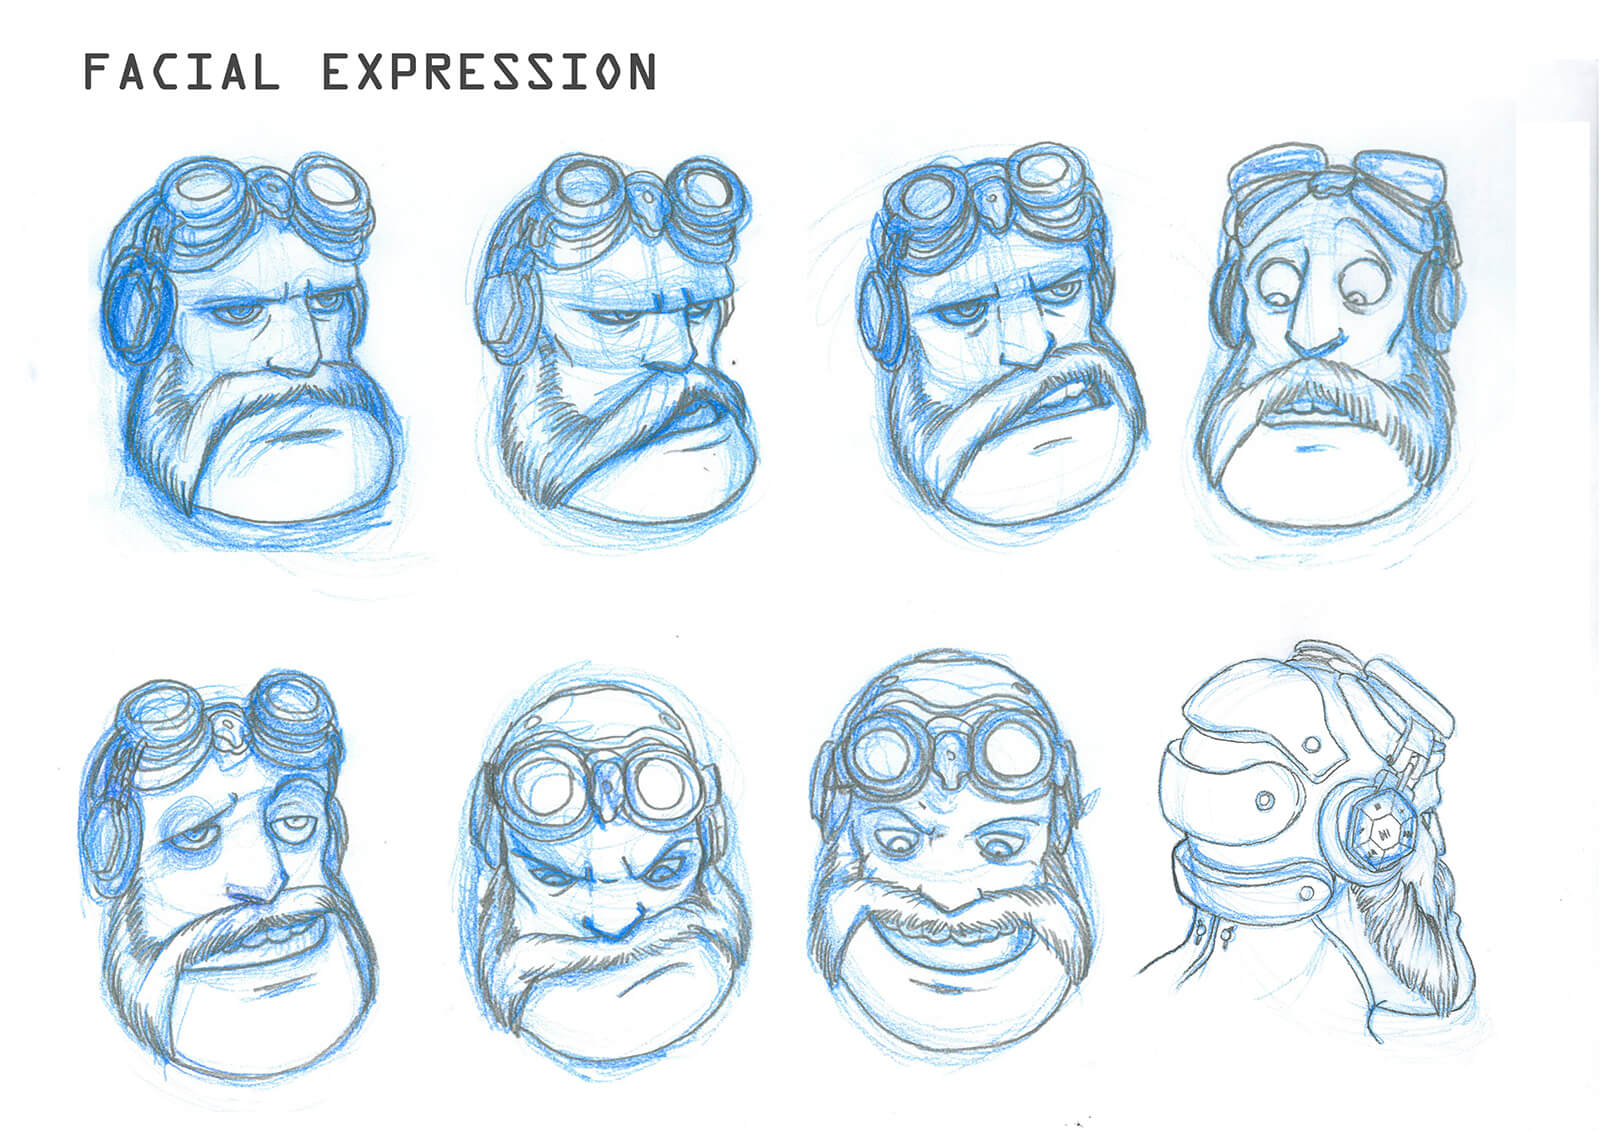 Blue and black sketches of facial expressions of a bearded man with goggles, depicting surprise and frustration among others